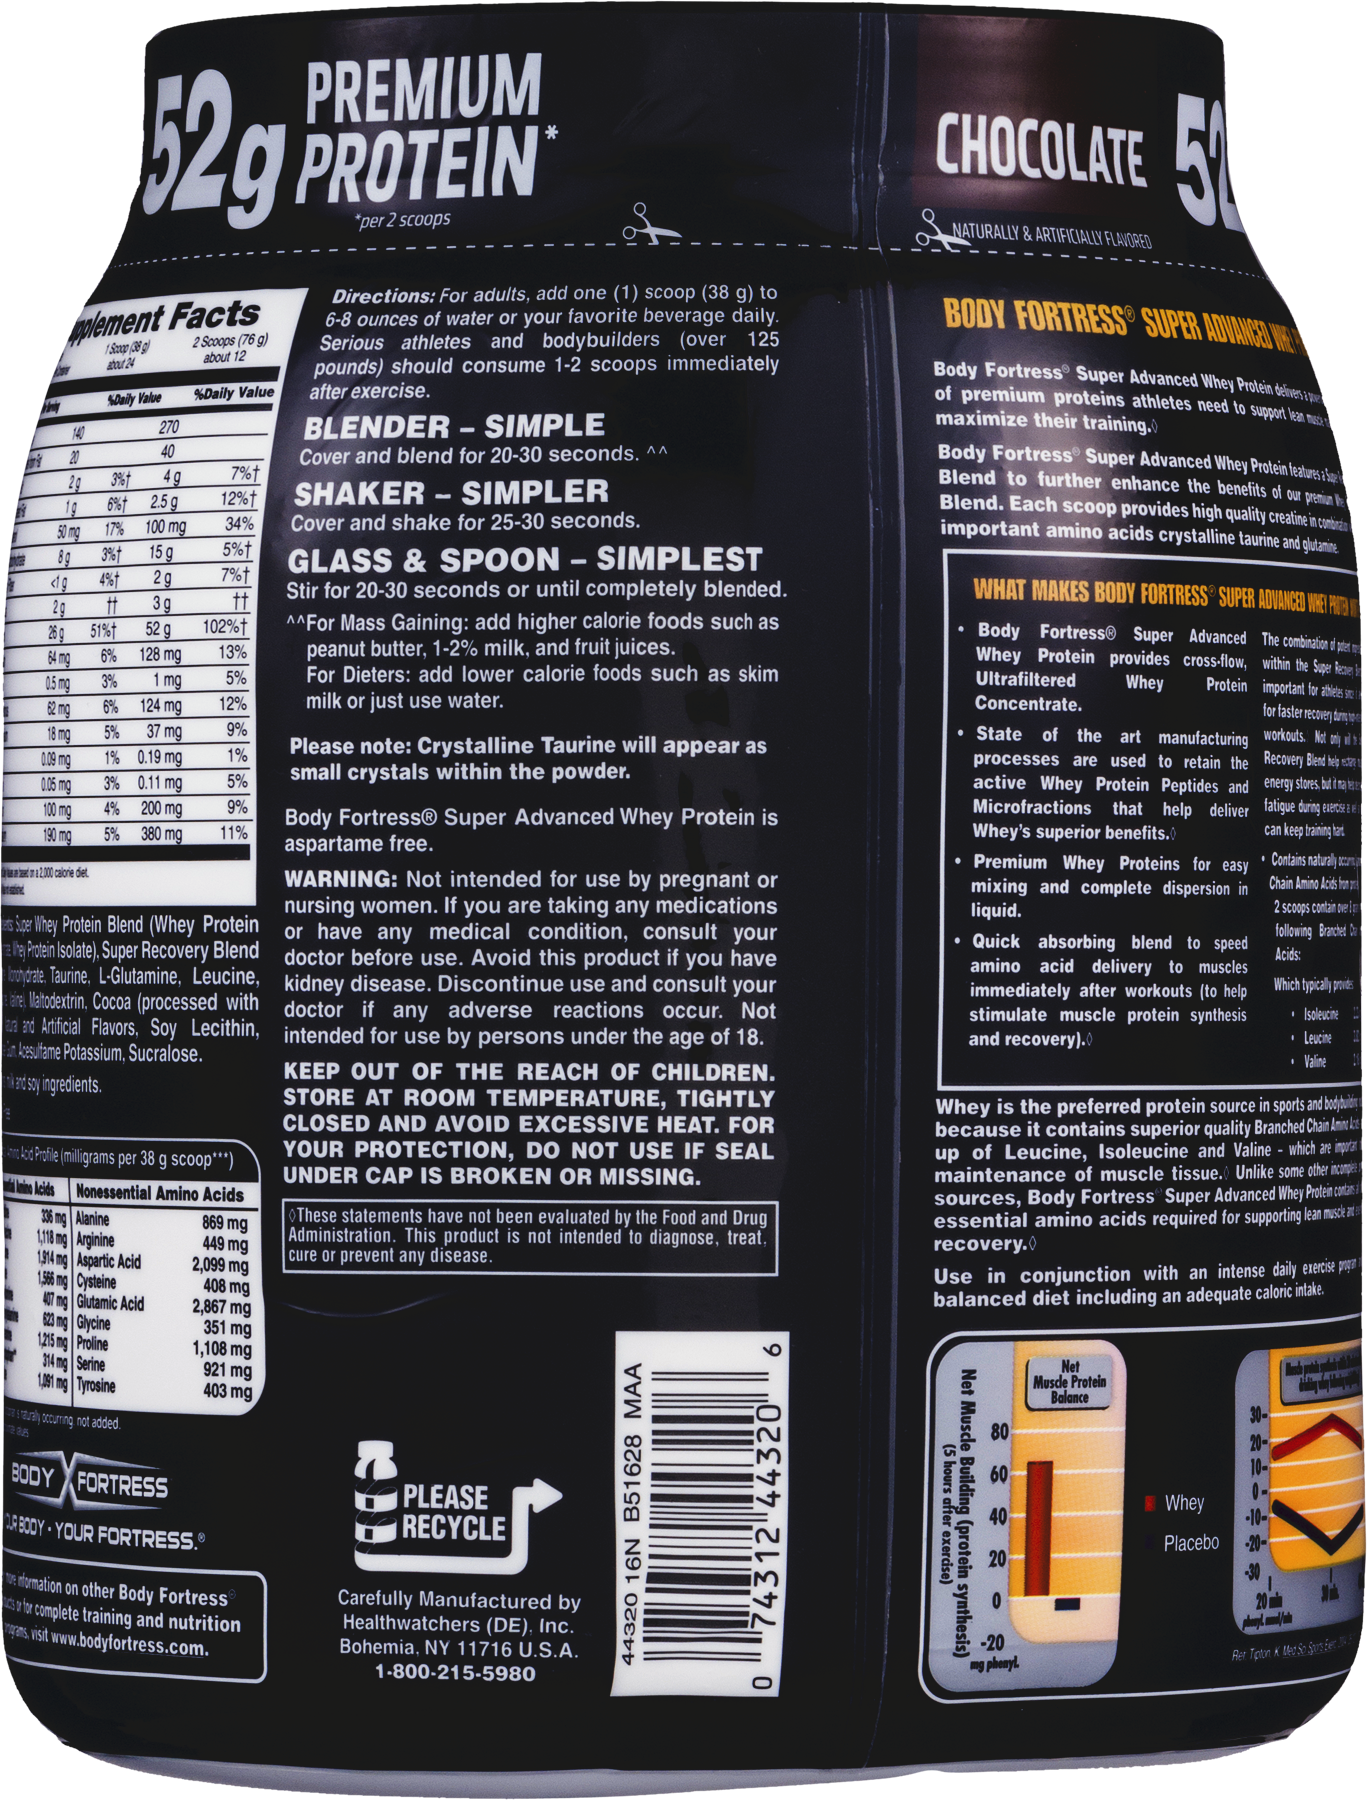 Body Fortress Super Advanced Whey Protein Powder, Chocolate, 1.95 lbs. - image 3 of 8